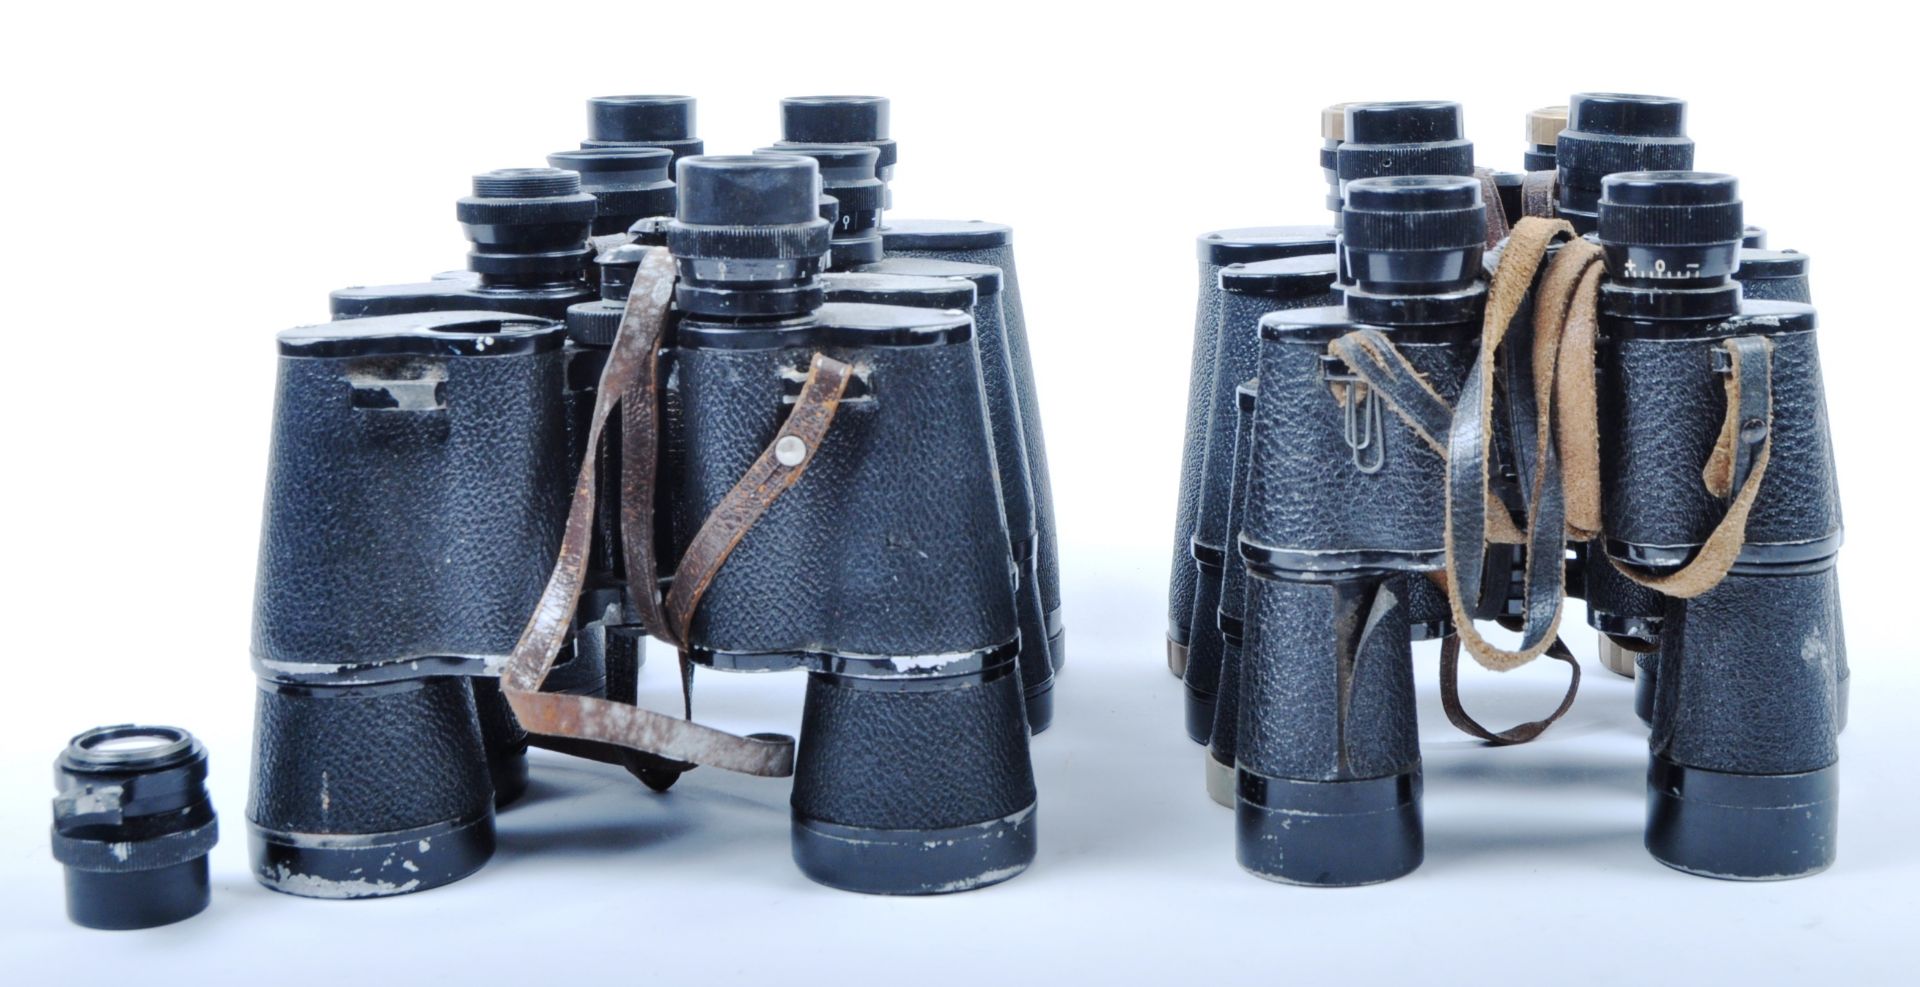 A MIXED COLLECTION OF VINTAGE BINOCULARS